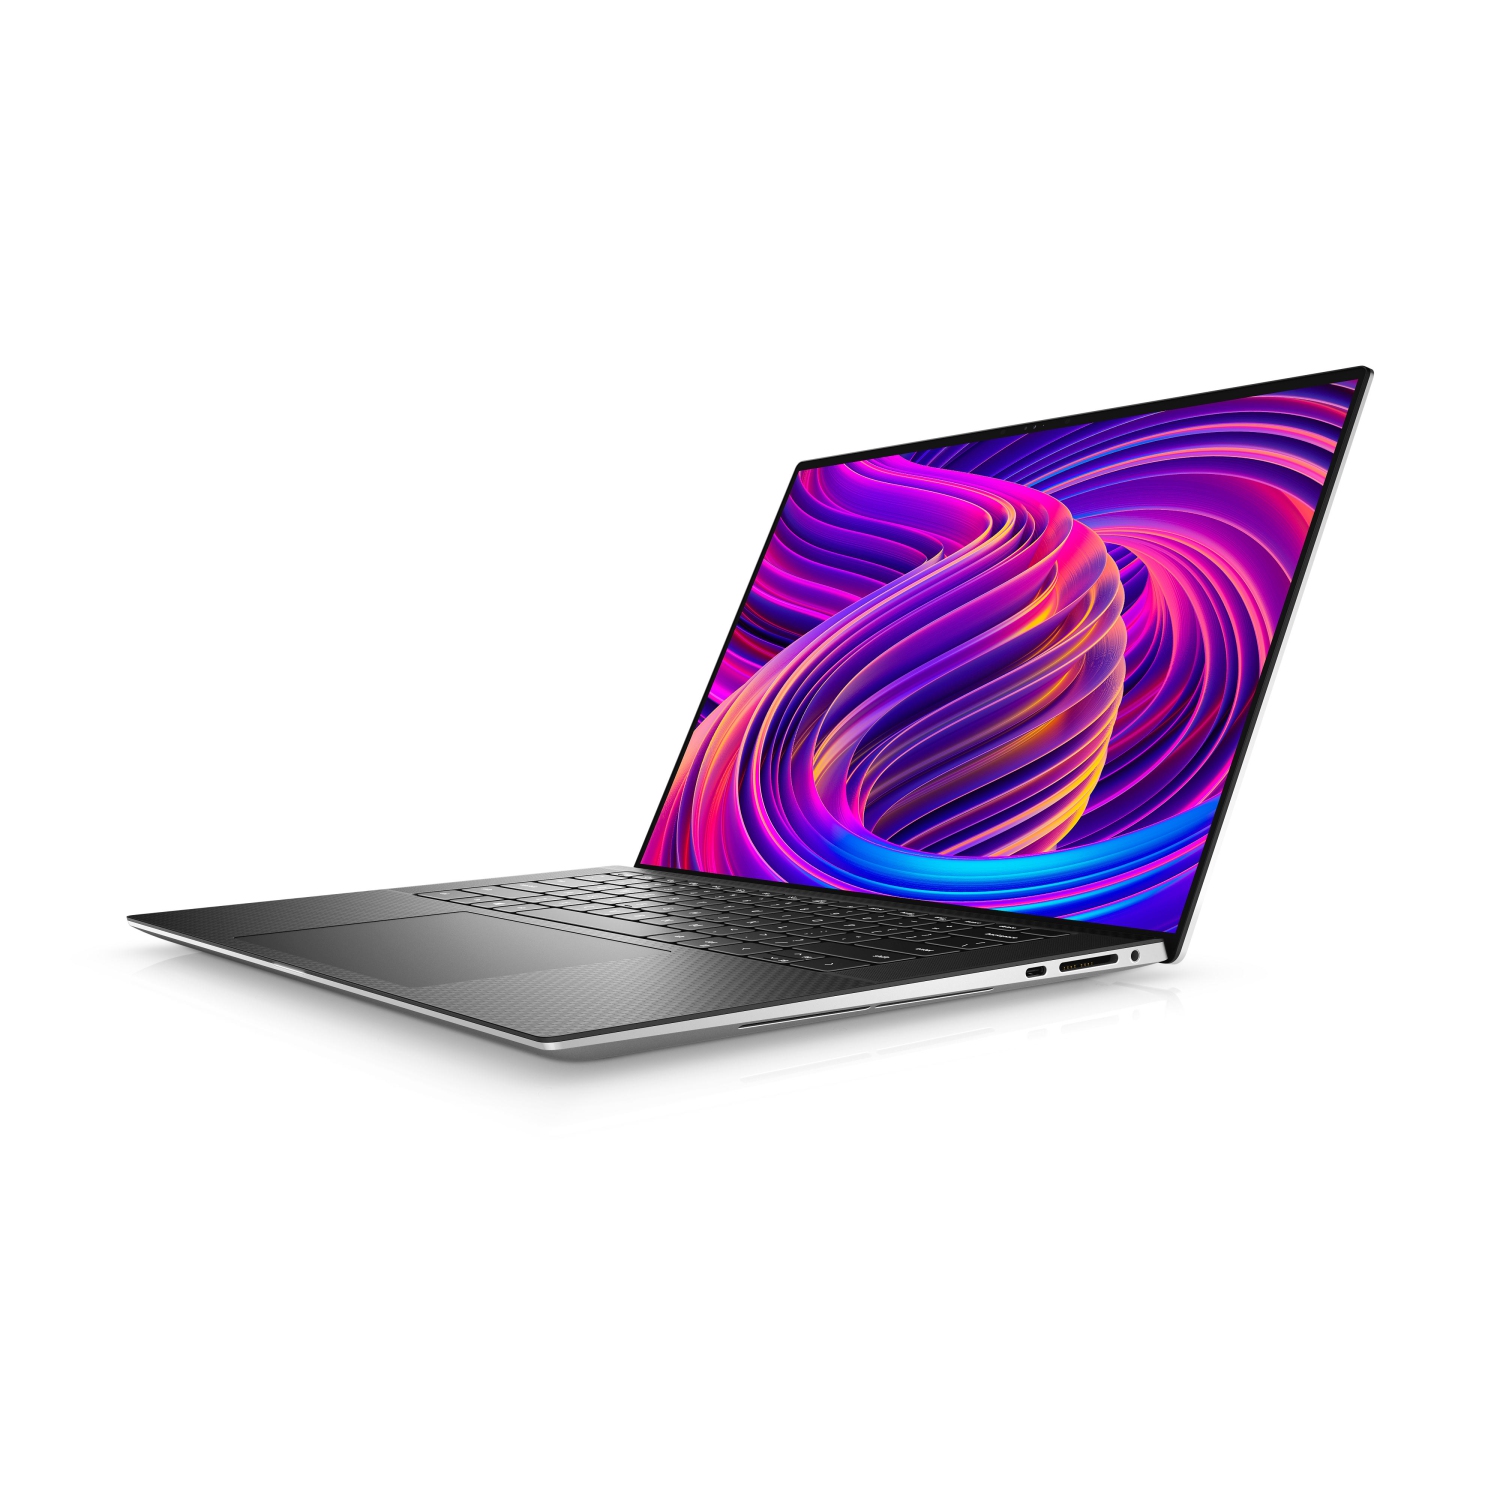 Refurbished (Excellent) - Dell XPS 15 9510 Laptop (2021) | 15.6" FHD+ | Core i7 - 1TB SSD - 32GB RAM - 3050 Ti | 8 Cores @ 4.6 GHz - 11th Gen CPU Certified Refurbished